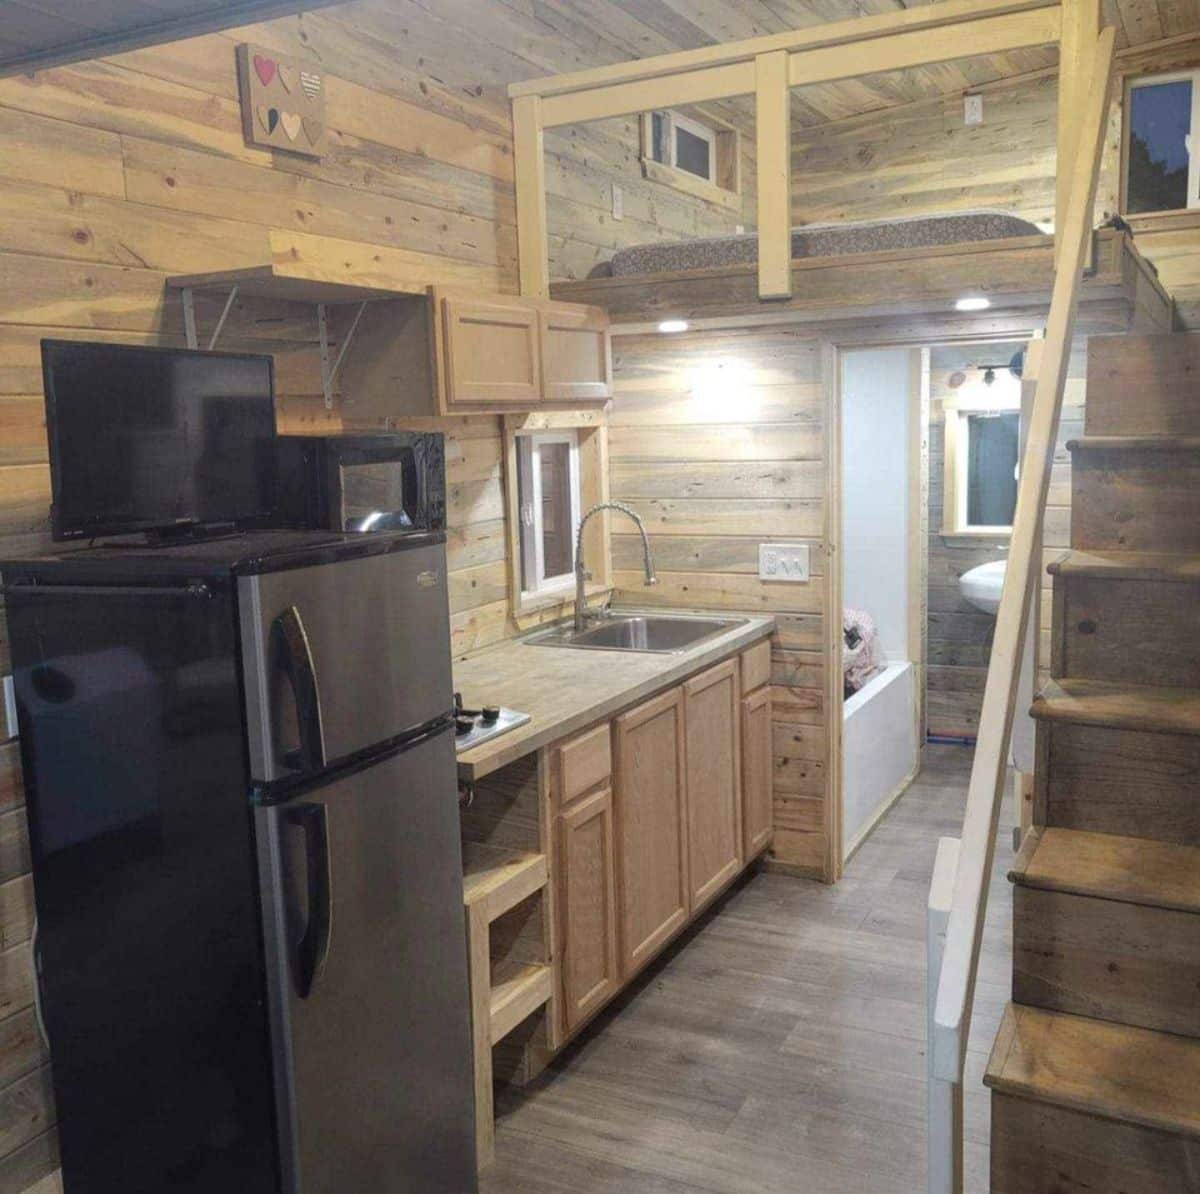 Kitchen area of 20’ tiny house with two lofts